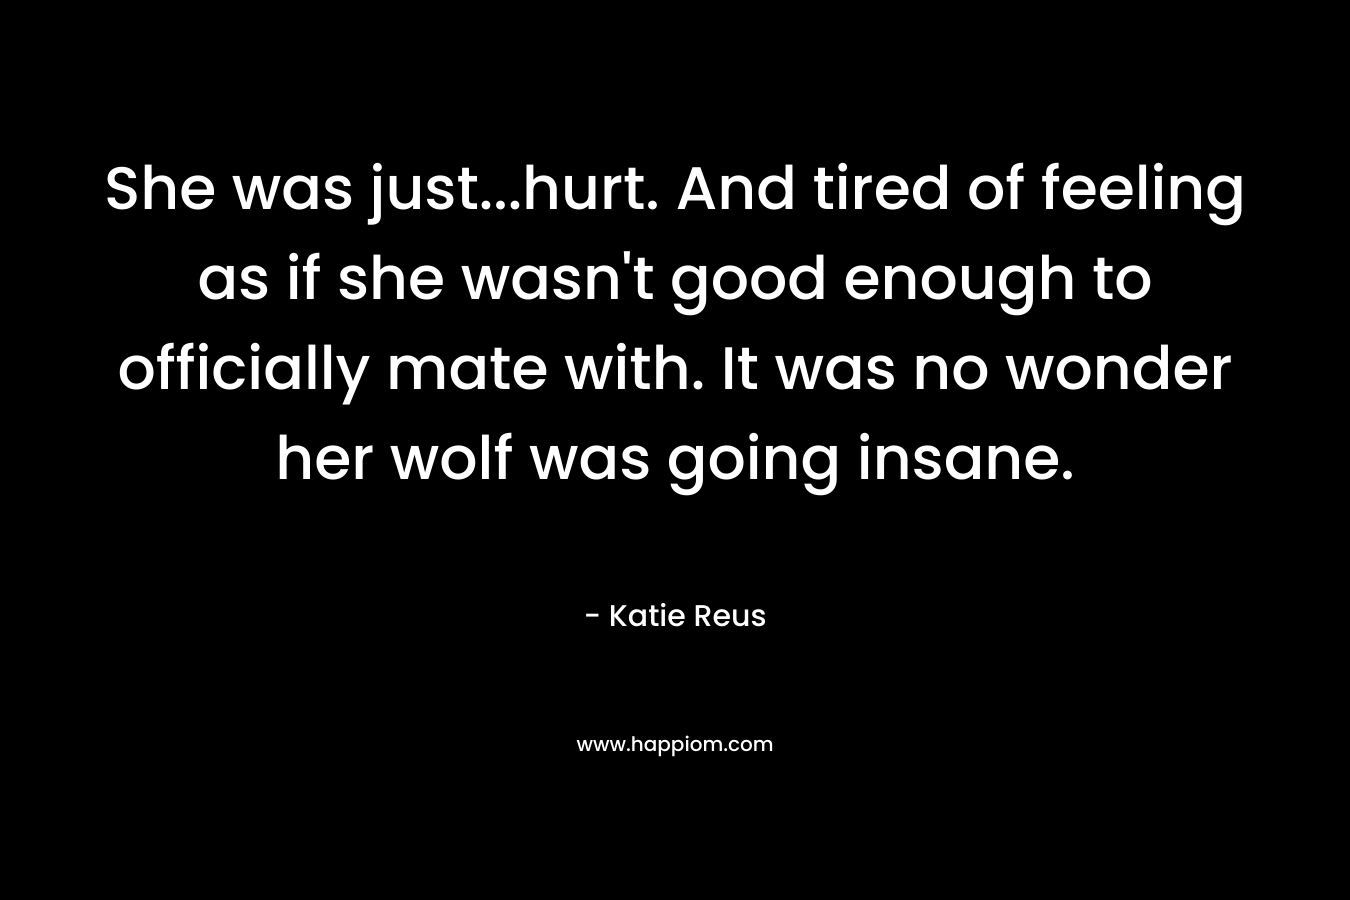 She was just…hurt. And tired of feeling as if she wasn’t good enough to officially mate with. It was no wonder her wolf was going insane. – Katie Reus